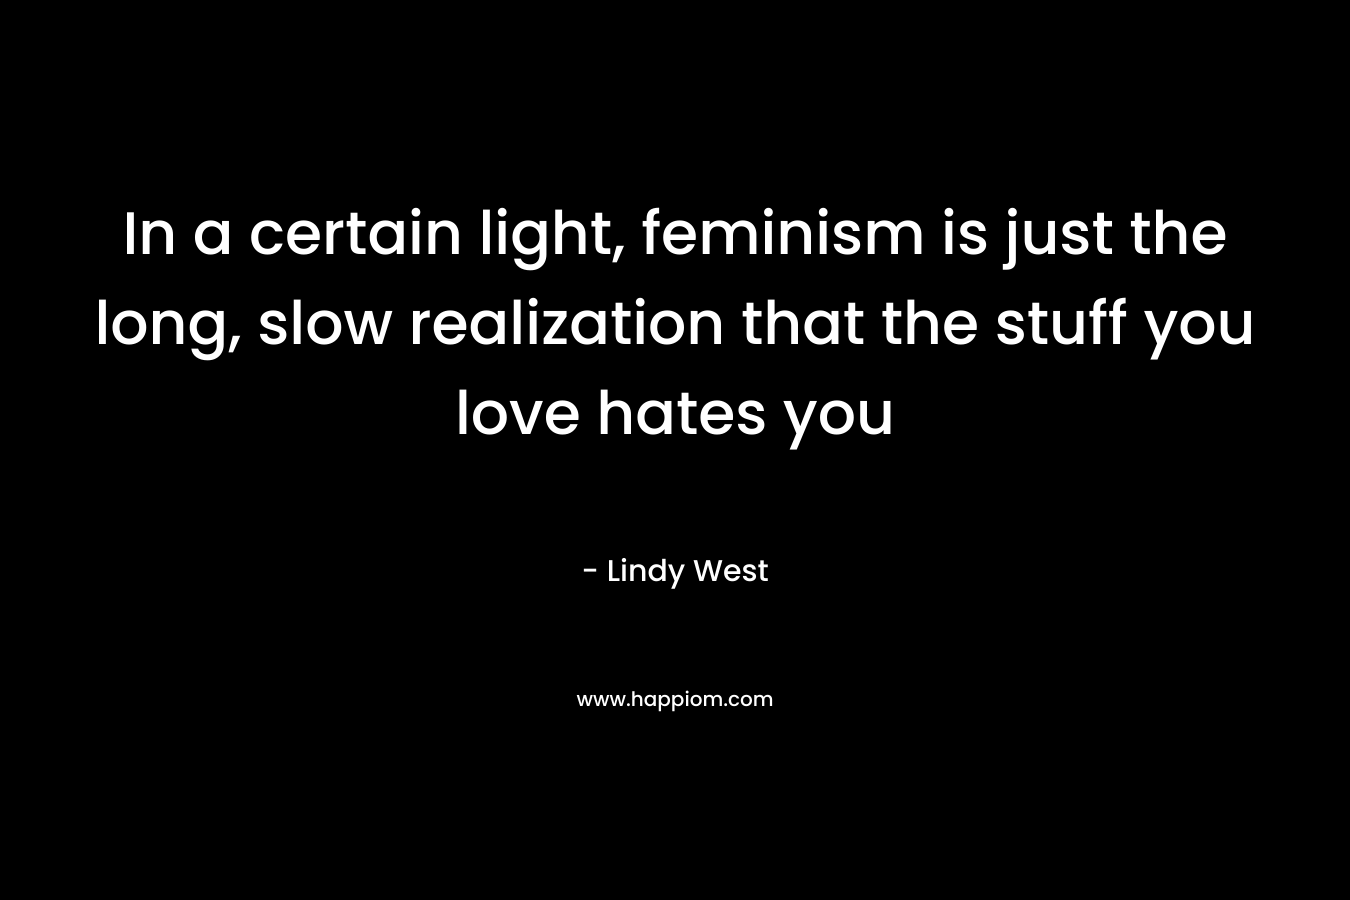 In a certain light, feminism is just the long, slow realization that the stuff you love hates you – Lindy West